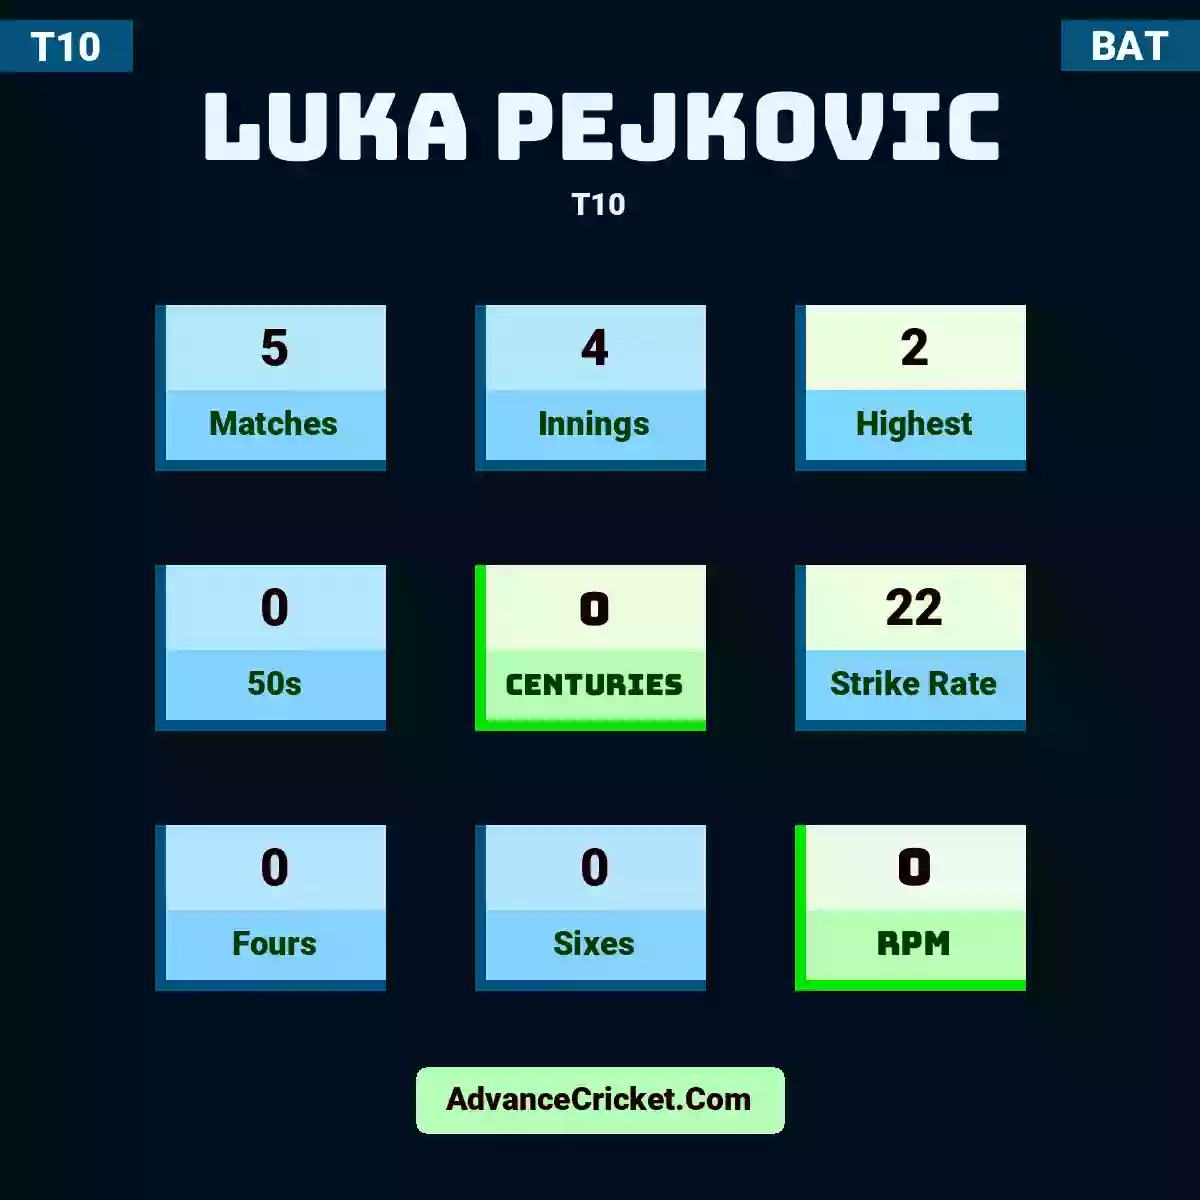 Luka Pejkovic T10 , Luka Pejkovic played 5 matches, scored 2 runs as highest, 0 half-centuries, and 0 centuries, with a strike rate of 22. L.Pejkovic hit 0 fours and 0 sixes, with an RPM of 0.